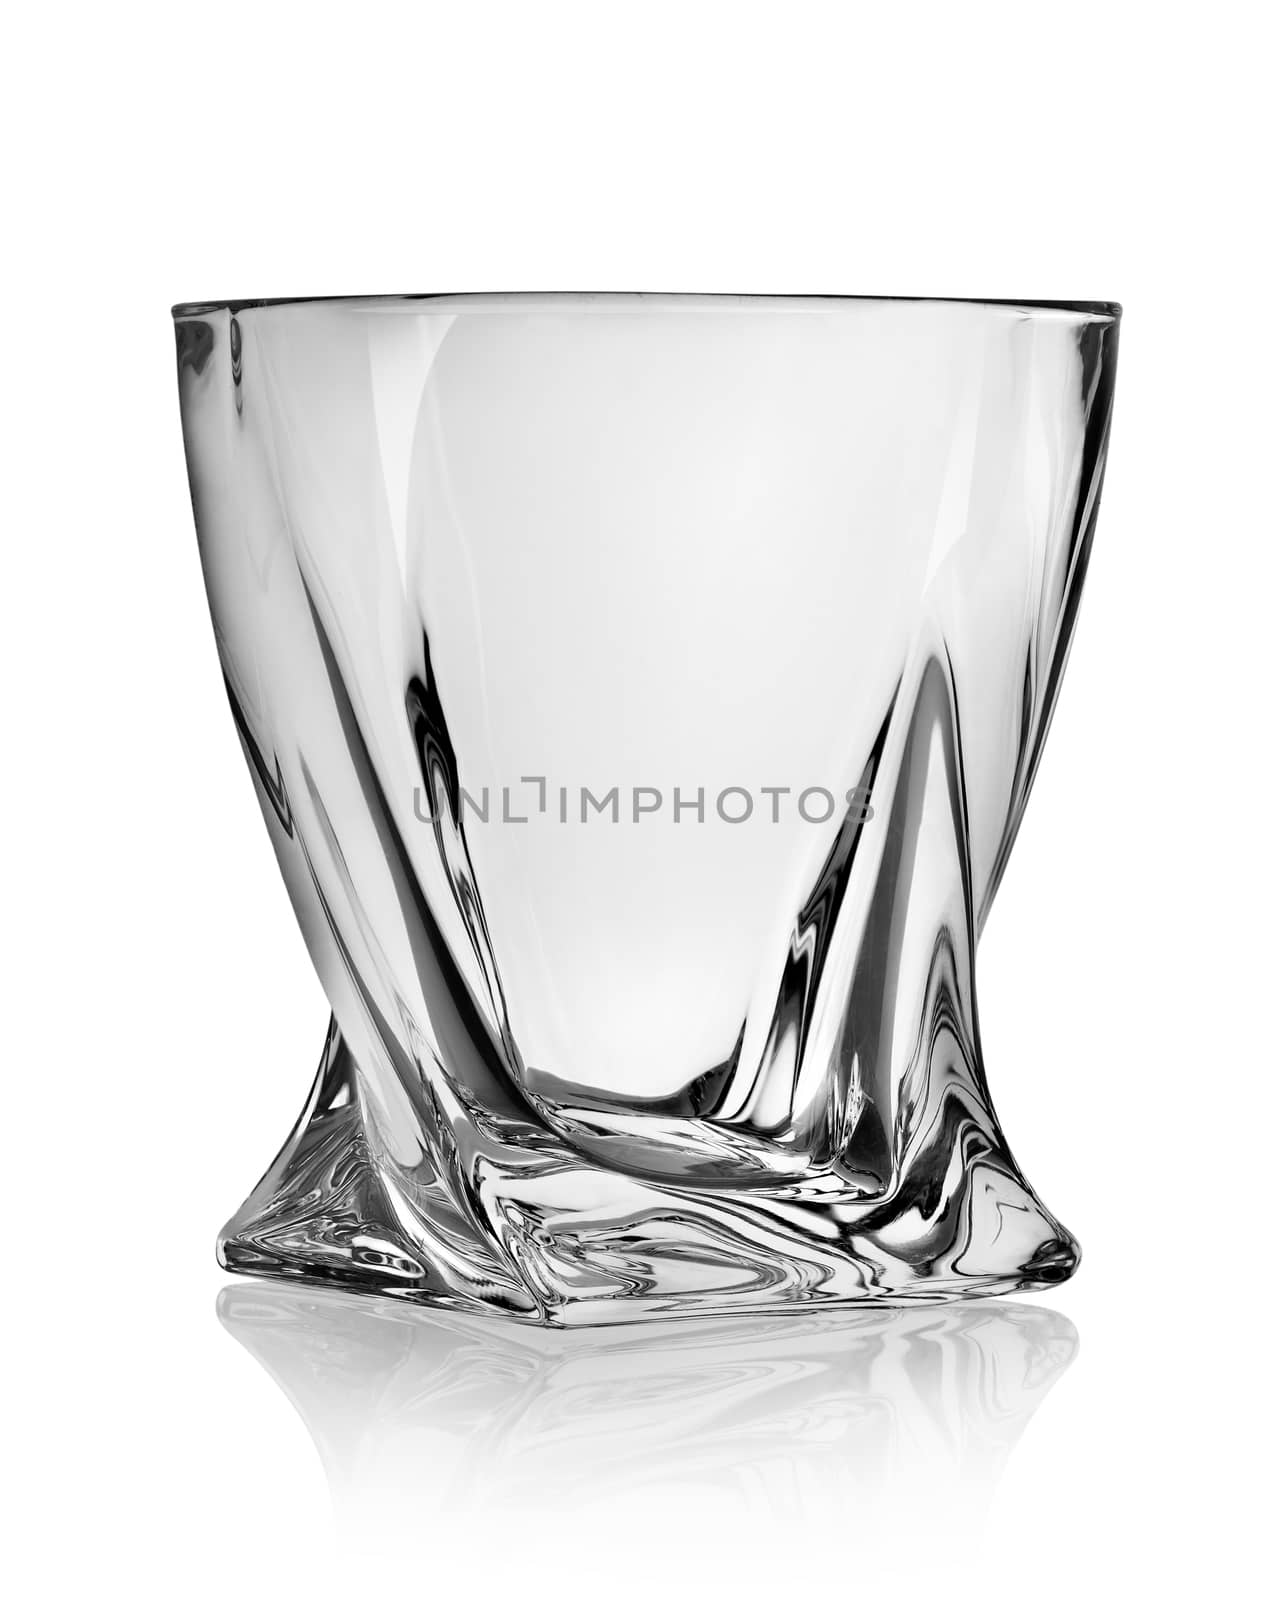 Figured glass for whiskey isolated on white